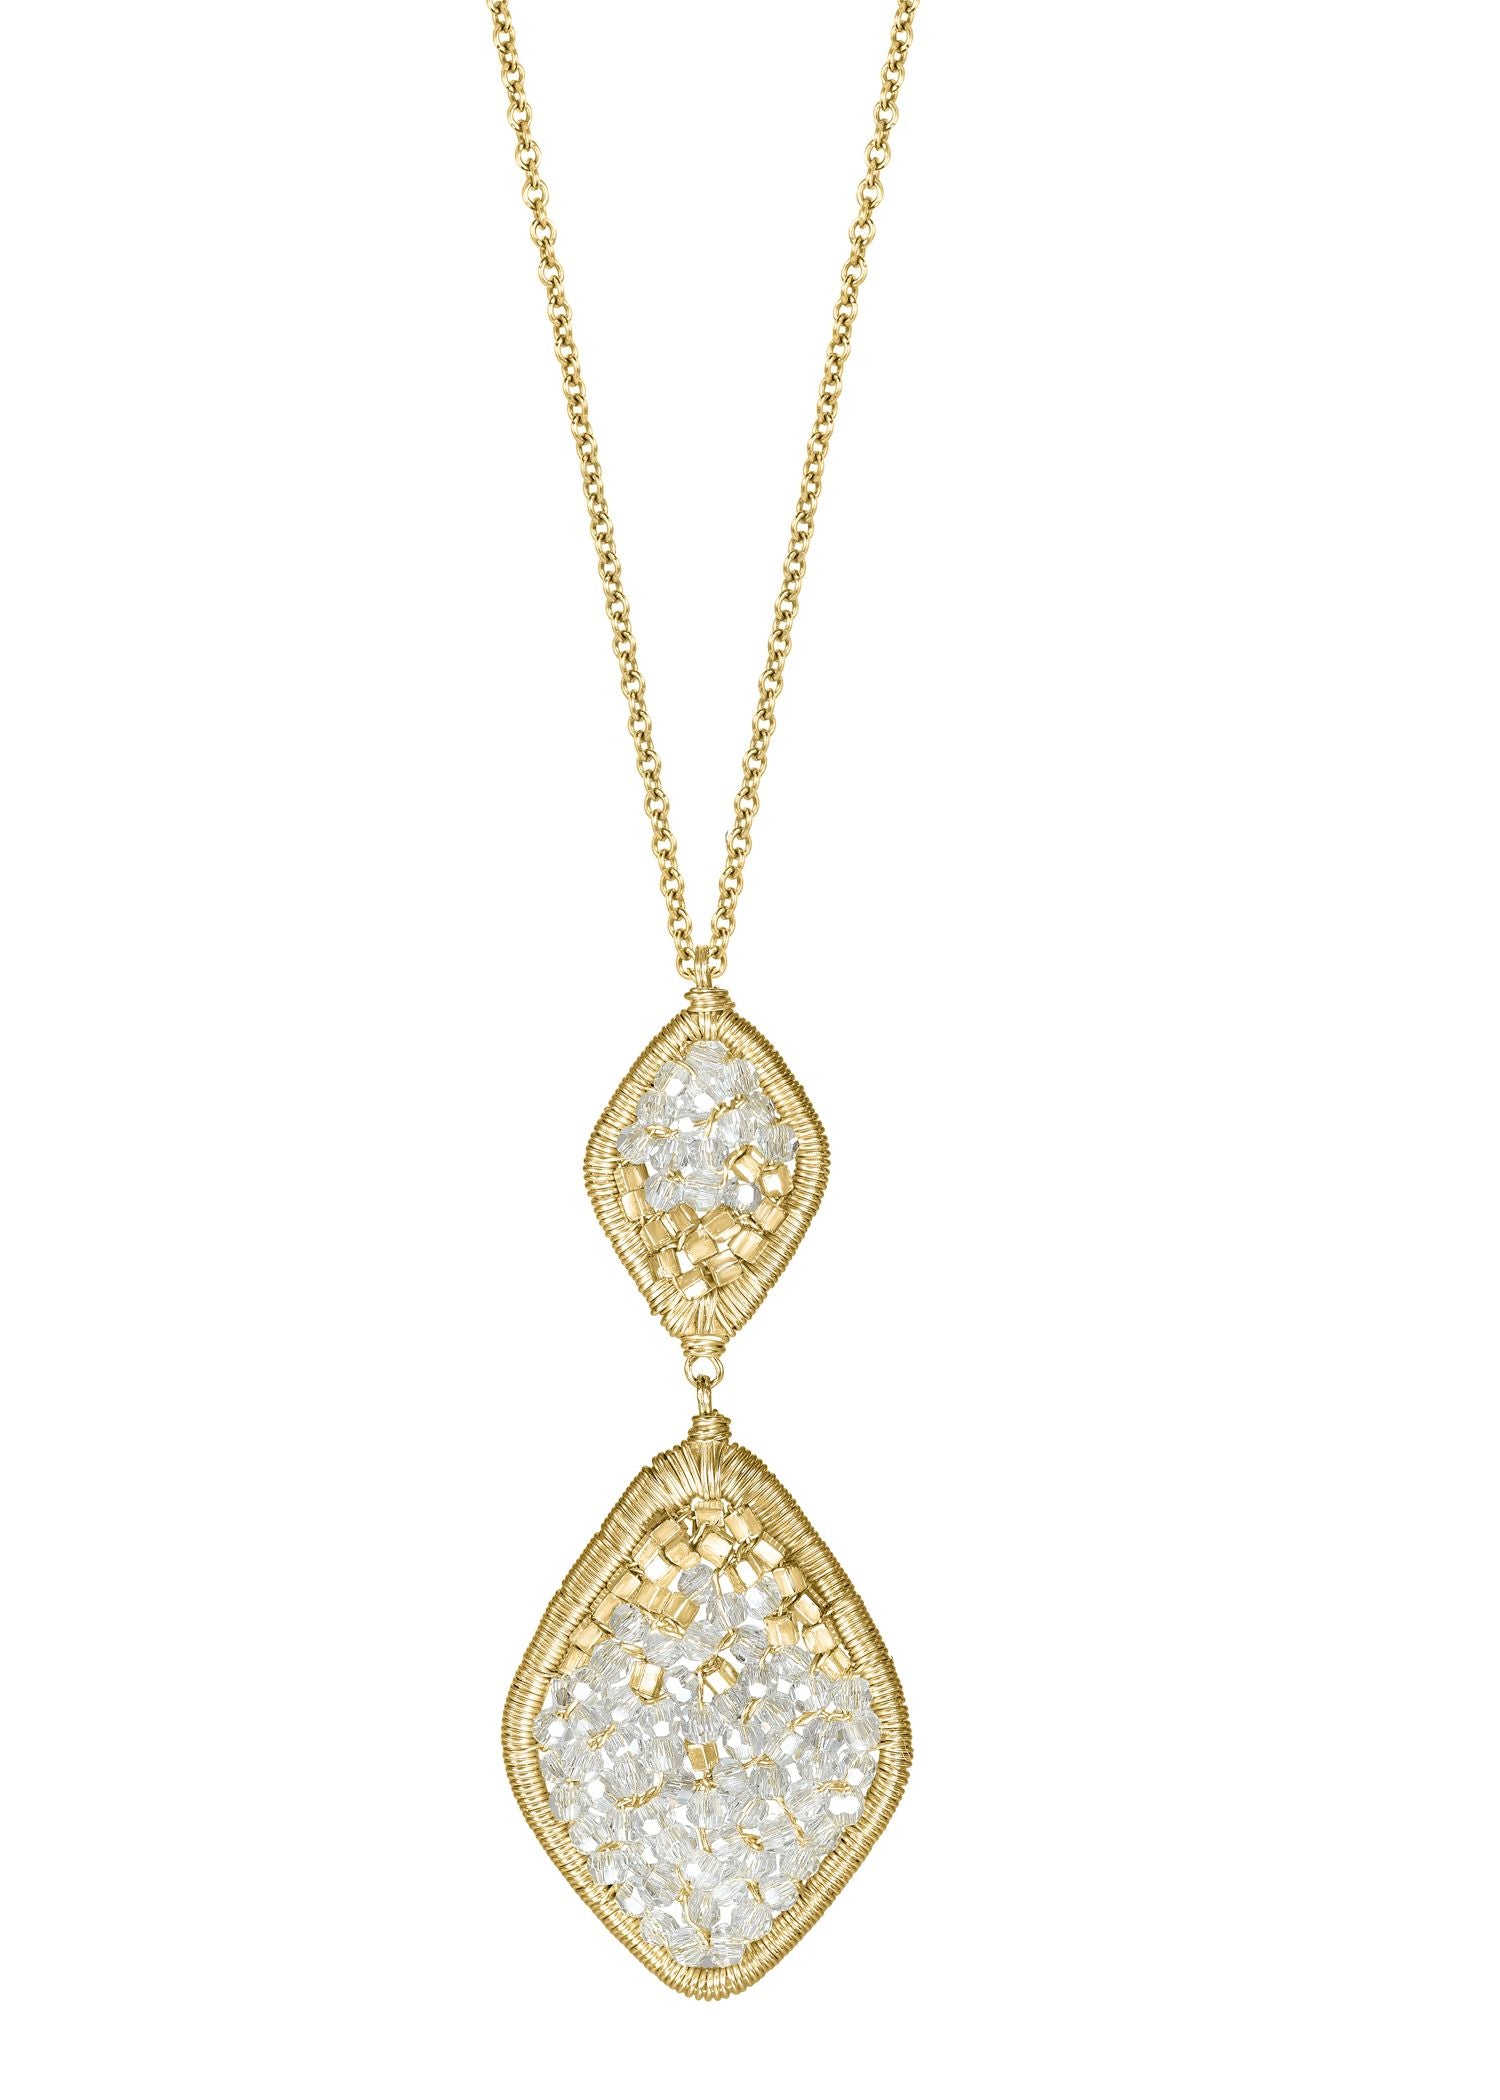 Crystal Golden seed beads 14k gold fill Necklace measures 17” in length Pendant measures 1-7/8” in length and 3/4” in width Handmade in our Los Angeles studio